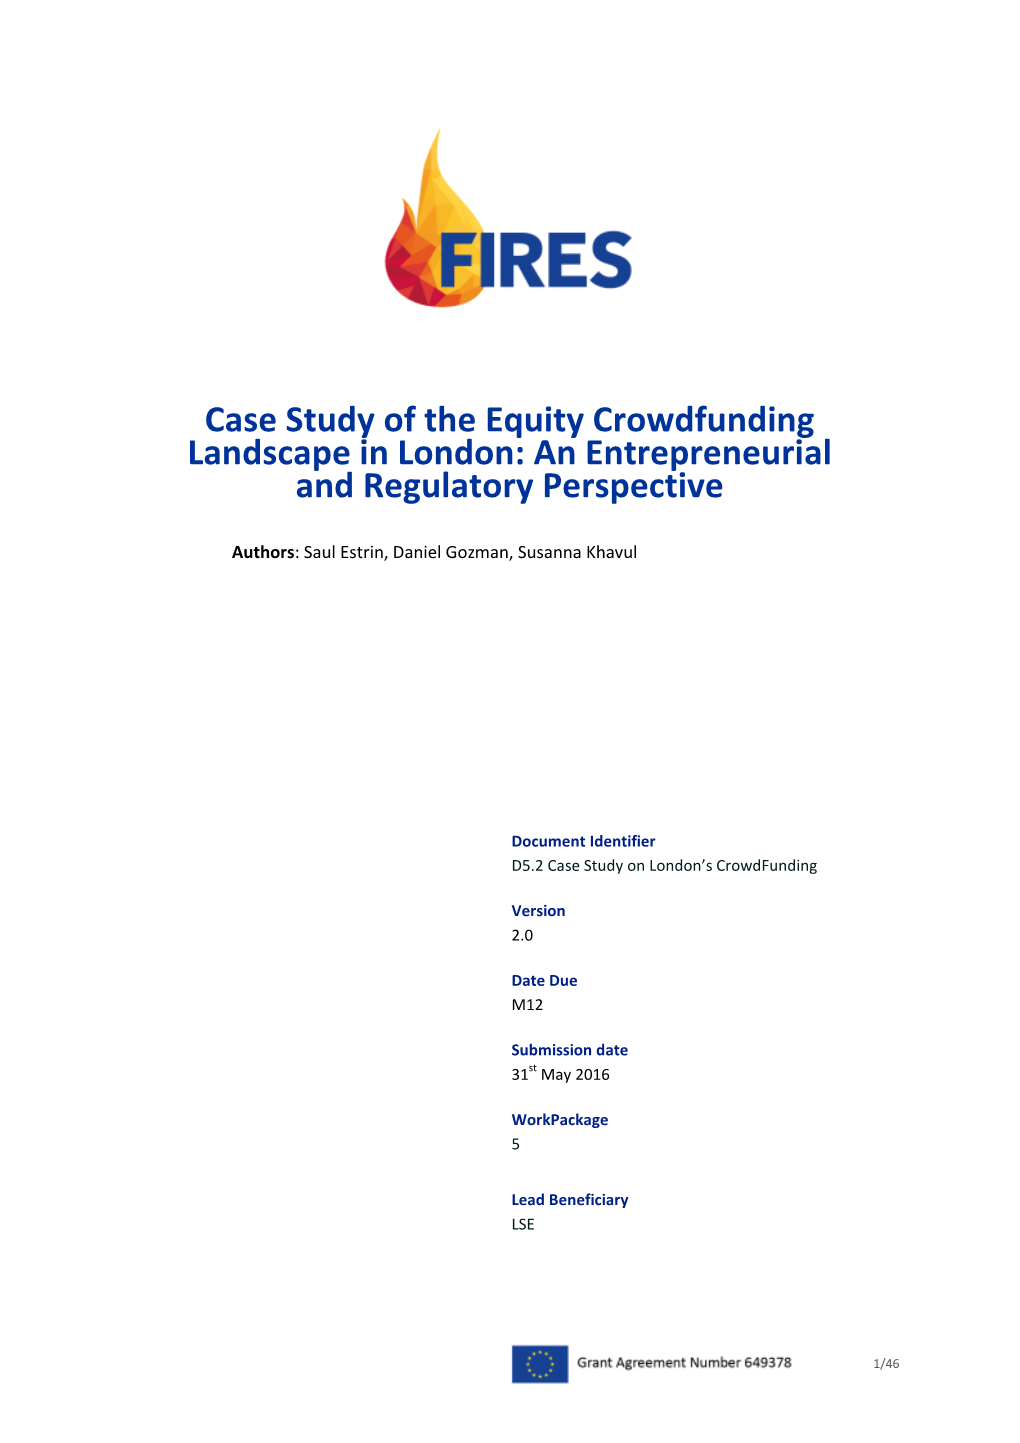 Case Study of the Equity Crowdfunding Landscape in London: an Entrepreneurial and Regulatory Perspective